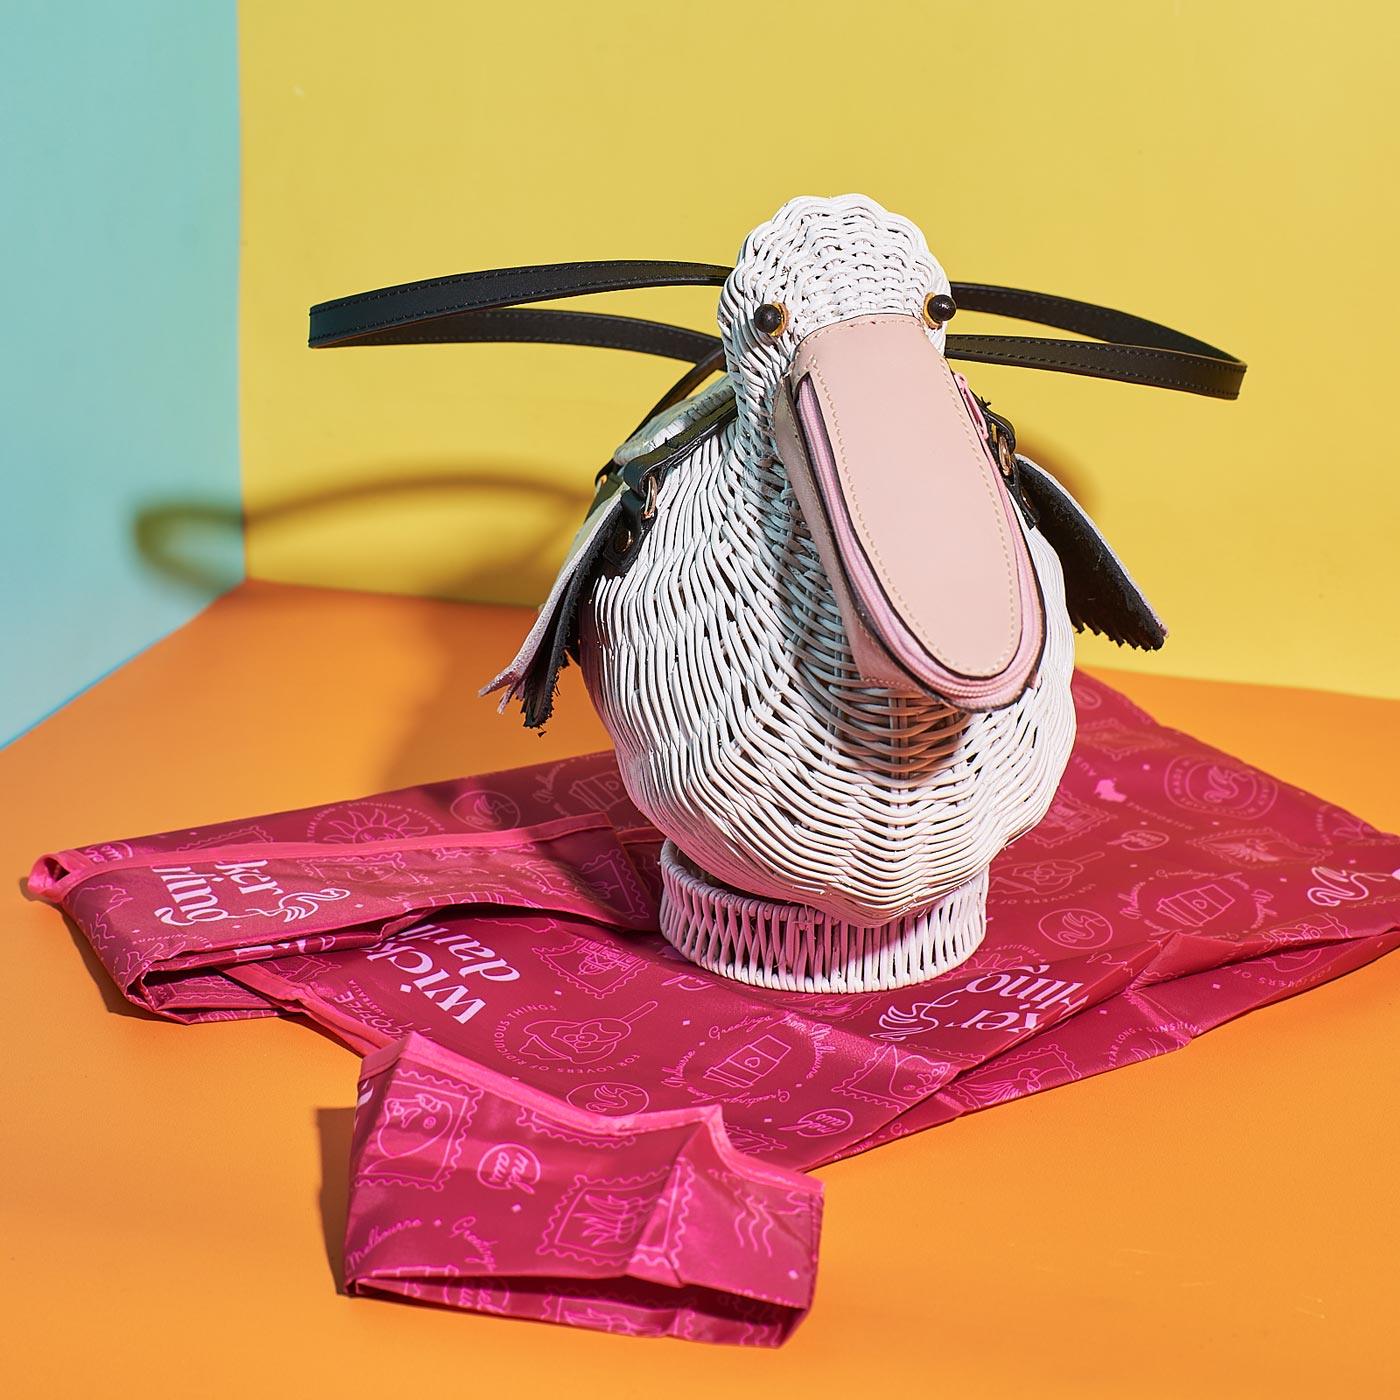 Pelican Bill the Wicker Pelican Bag sitting on Wicker Darling's pink fabric dust bag/shopping totes 